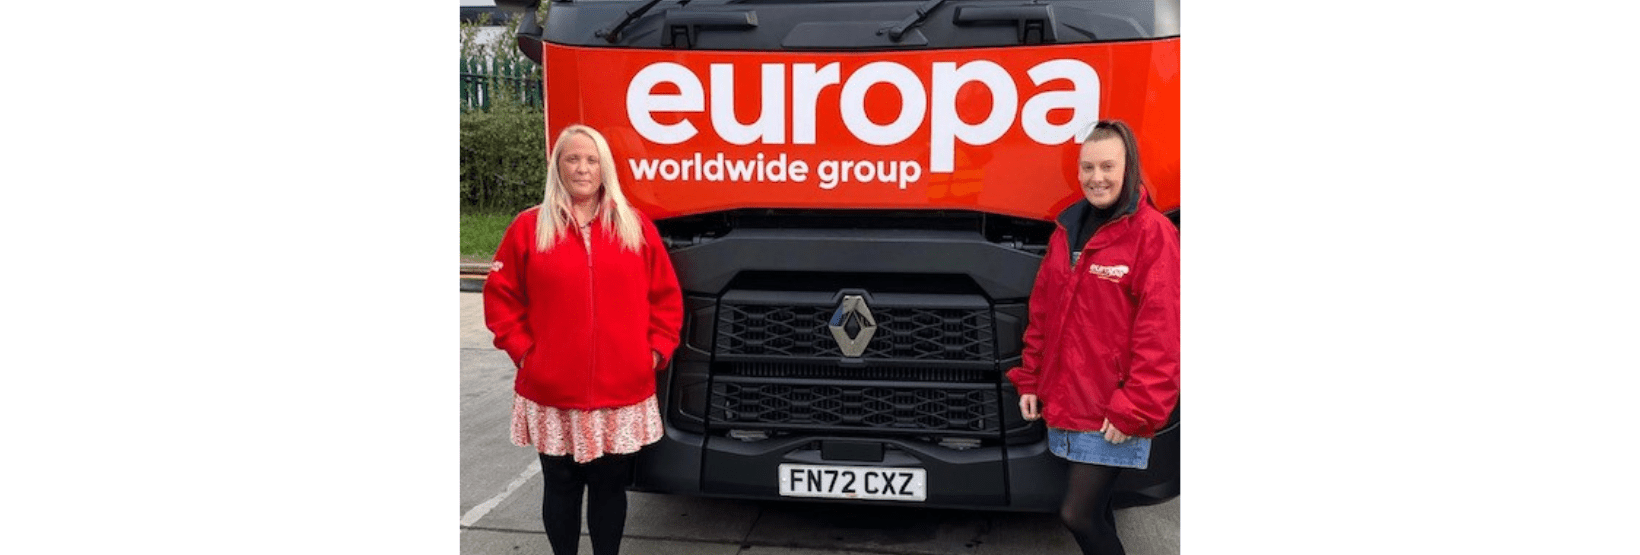 Sarah Elliott stands in front of red, branded Europa truck